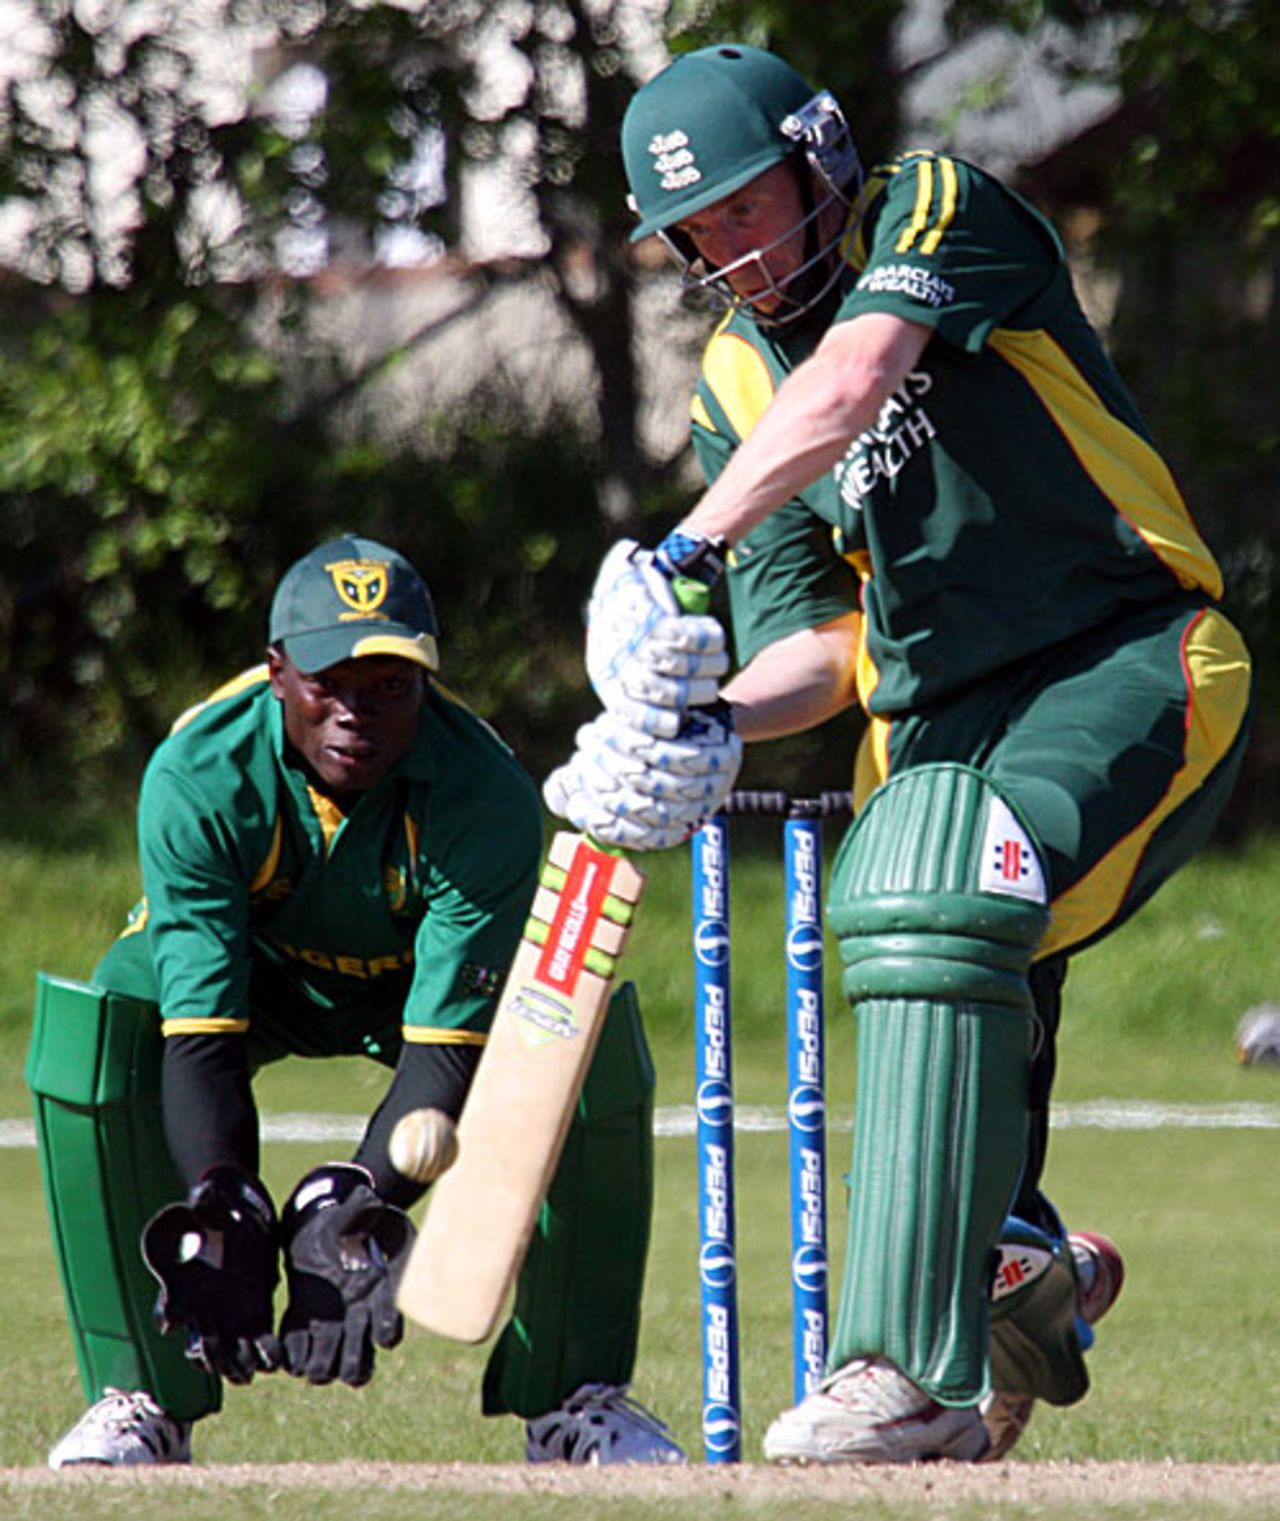 Jeremy Frith drives during his unbeaten 101, Guernsey v Nigeria, ICC World Cricket League Division 7, St Peter Port, May 21, 2009